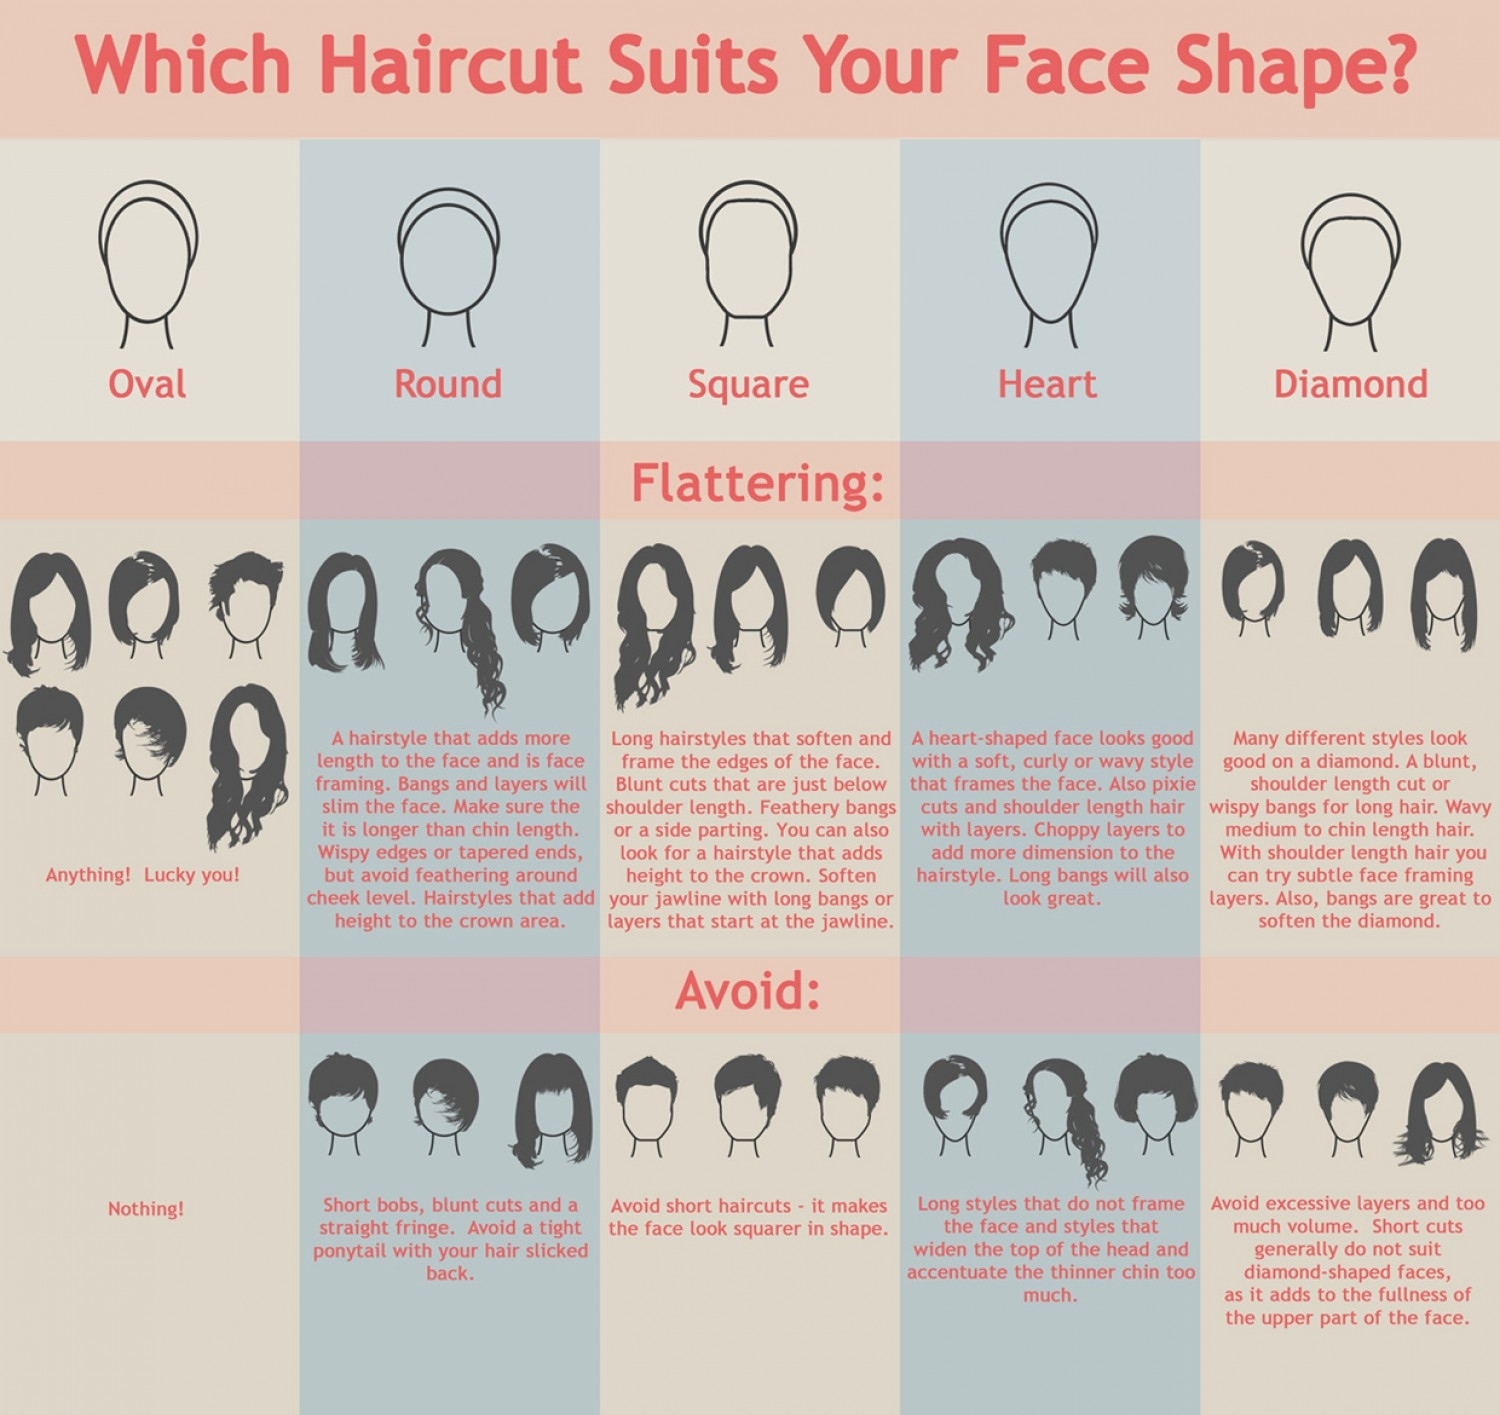 Which Haircut Suits Your Face Shape? | Visual.ly intended for Hairstyles That Suit Me